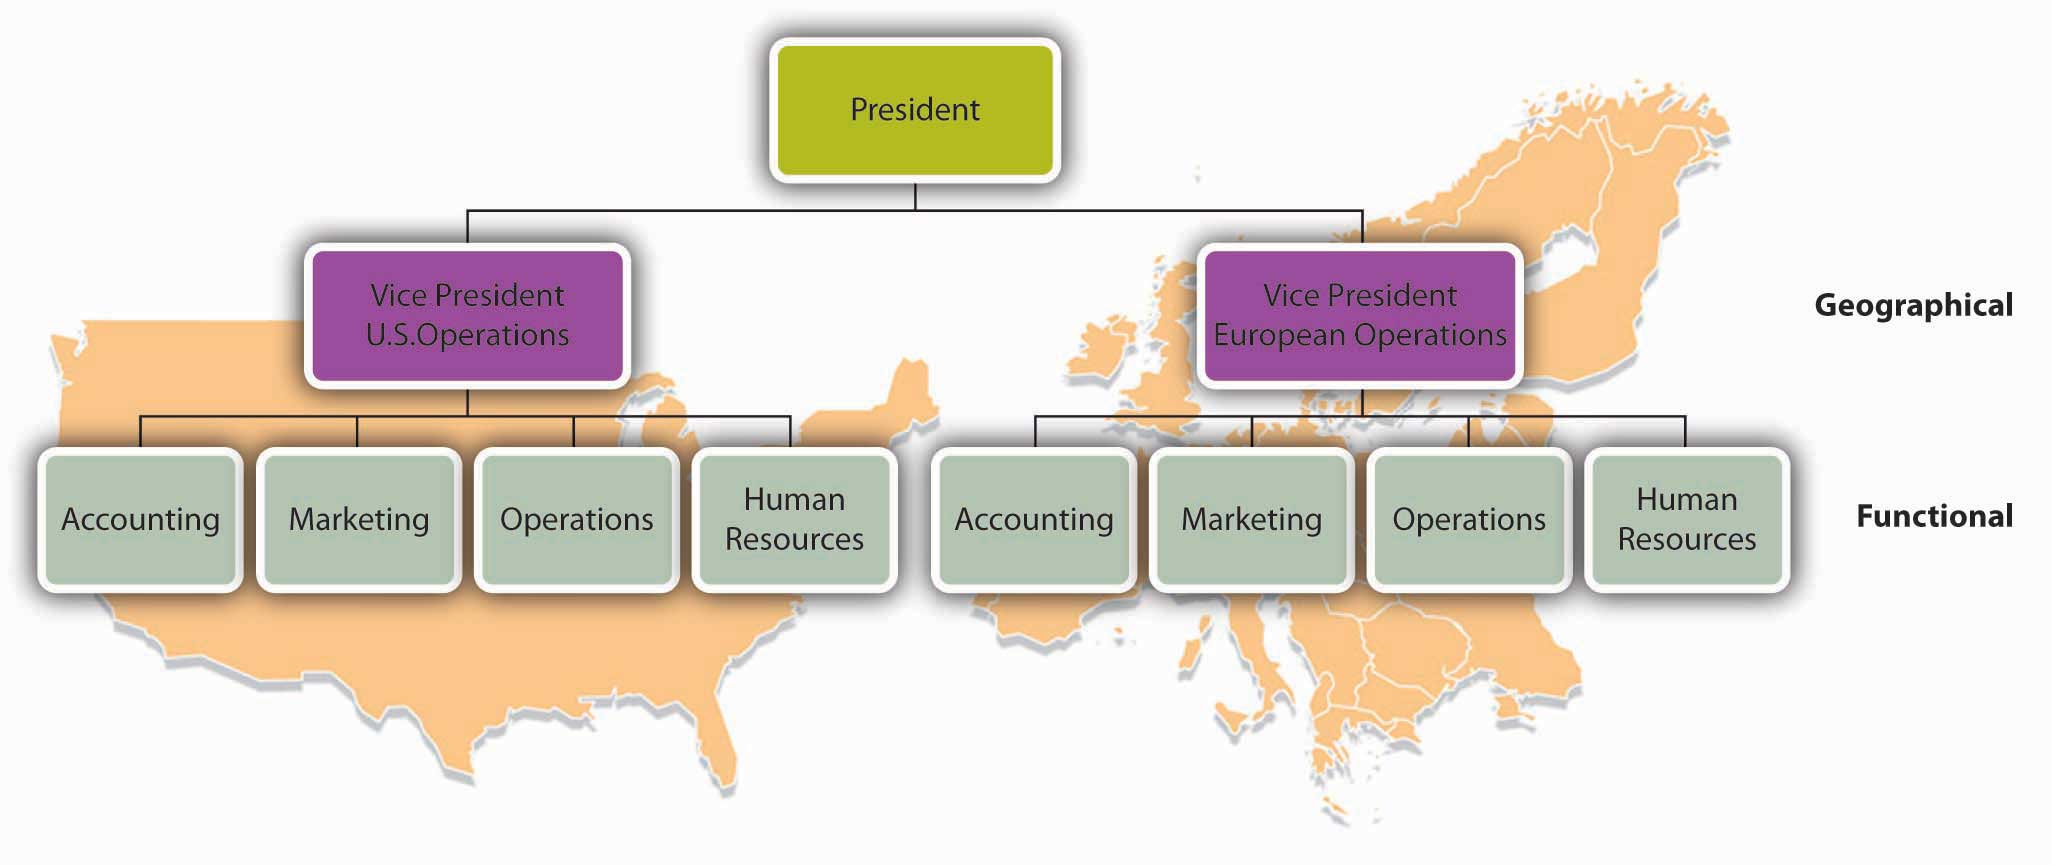 Org chart spreading over the US and Europe. The president supervises the vice president of US Operations and the vice president of European Operations. Both vice presidents are over separate Accounting, Marketing, Operations, and Human Resources departments. This shows both geographical and functional organization.